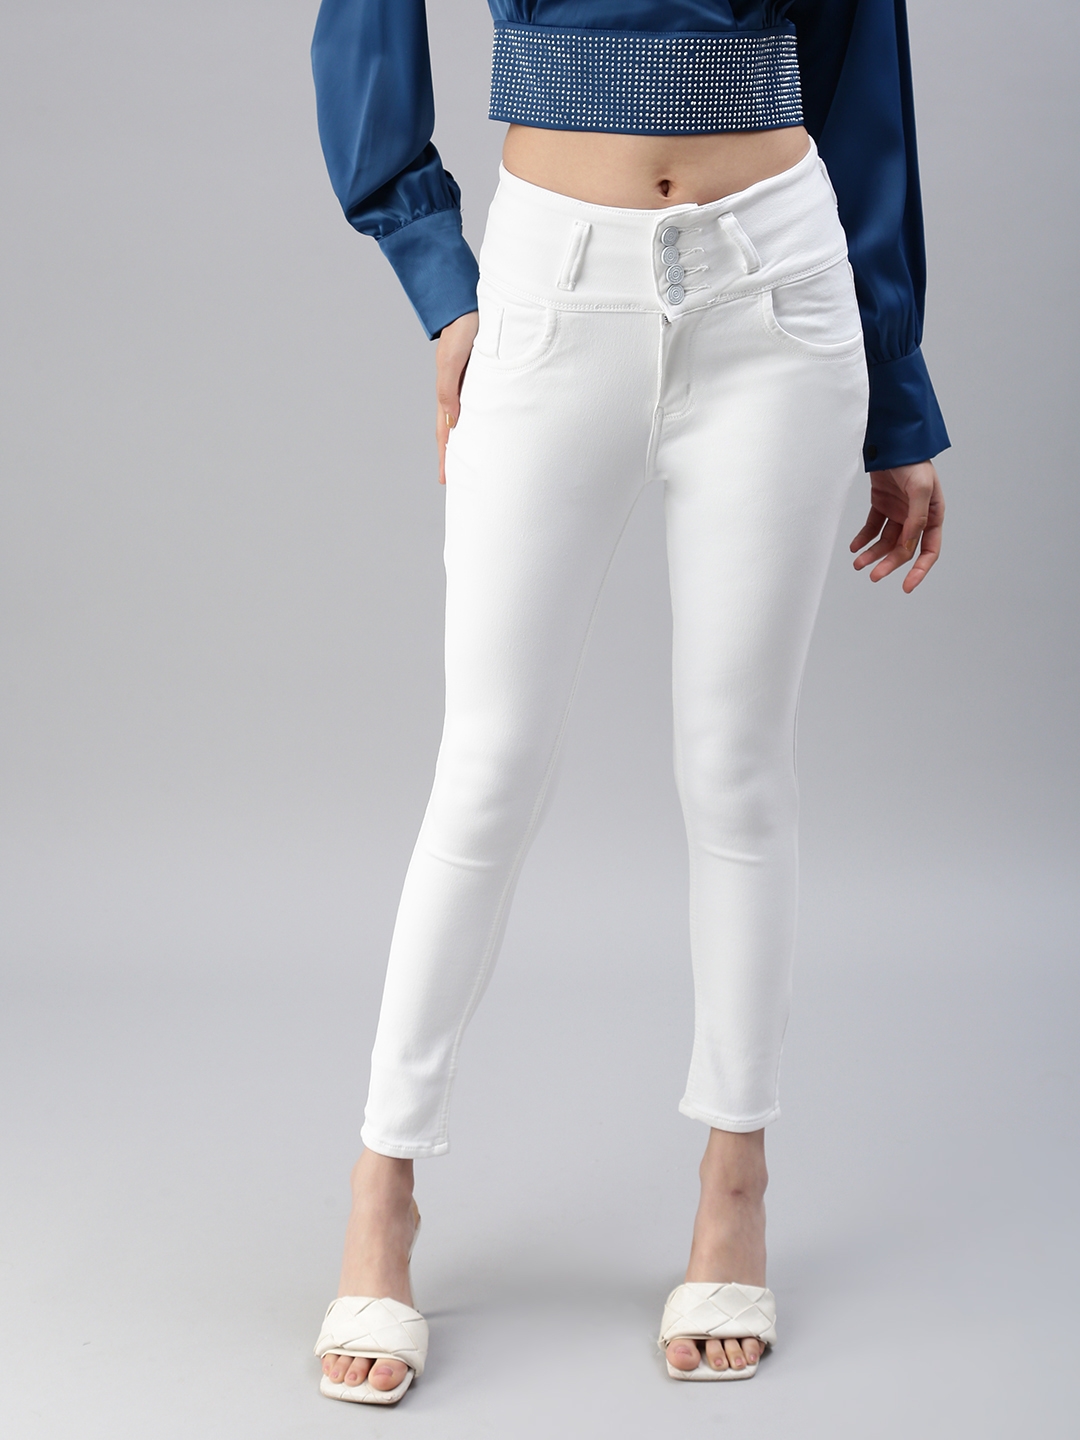 Showoff | SHOWOFF Women's Clean Look White Skinny Fit Denim Jeans